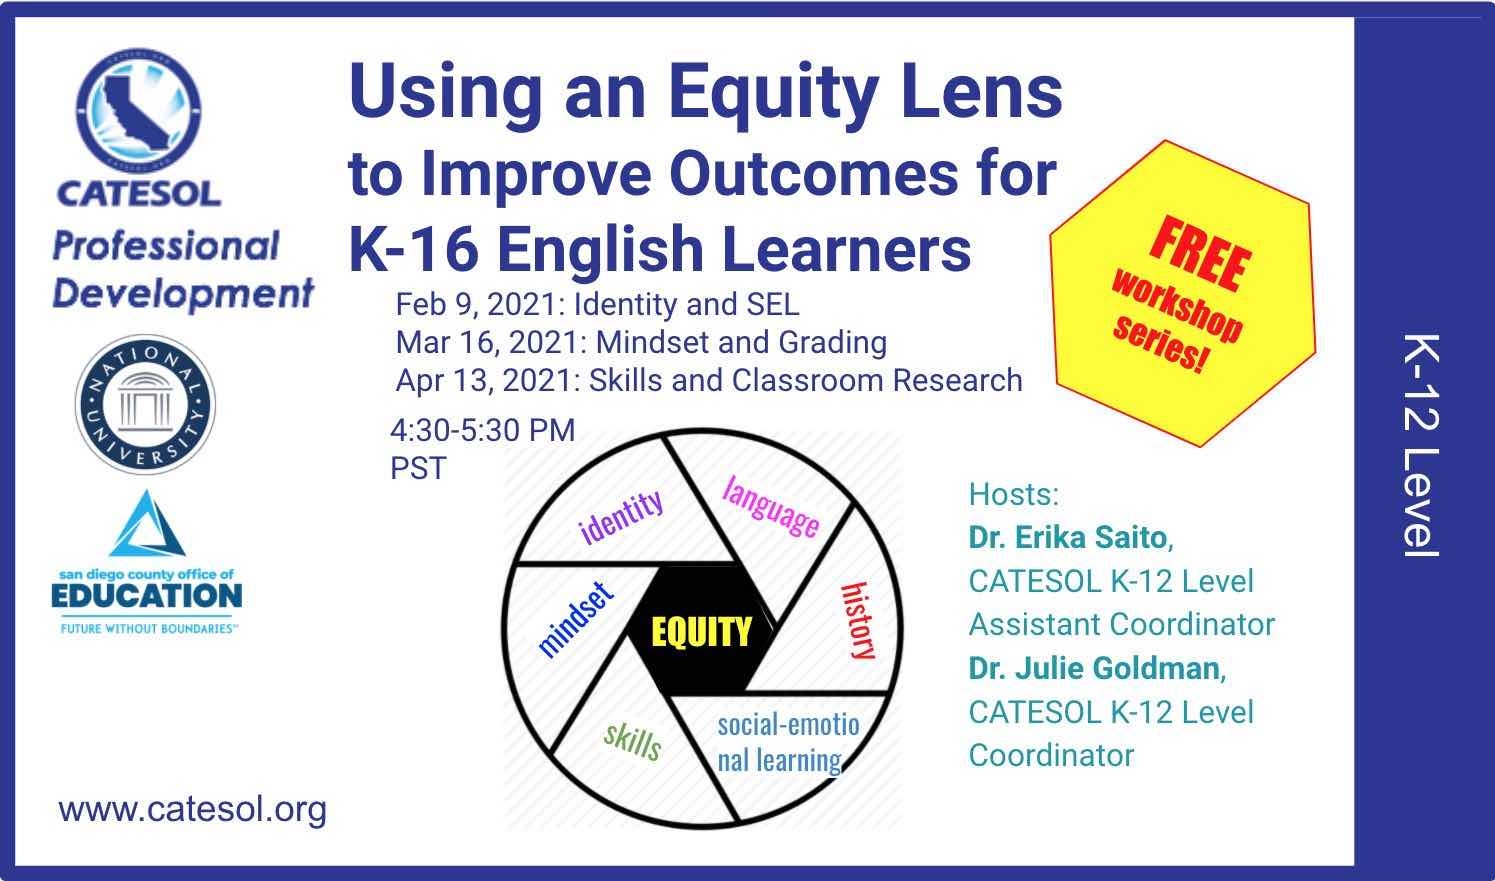 Using an Equity Lens